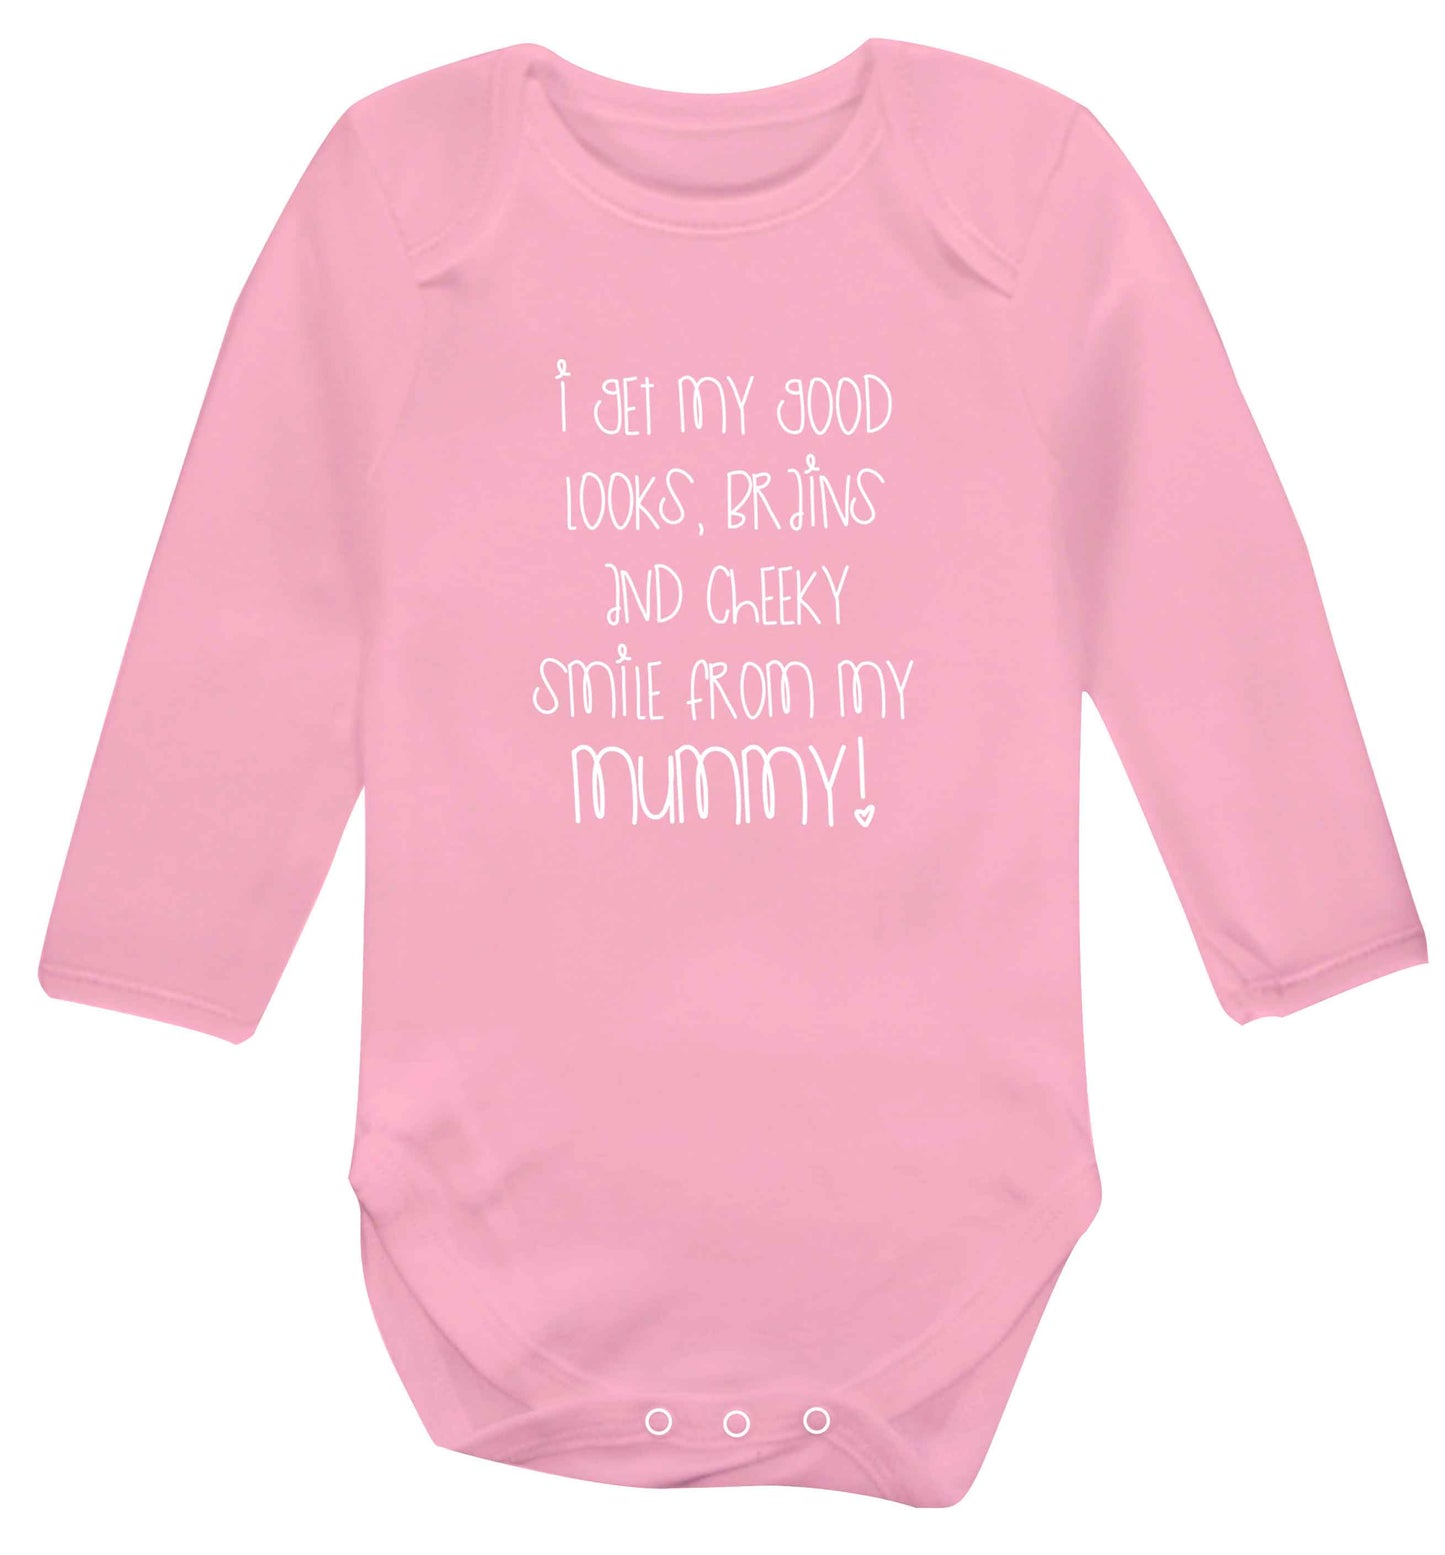 I get my good looks, brains and cheeky smile from my mummy baby vest long sleeved pale pink 6-12 months